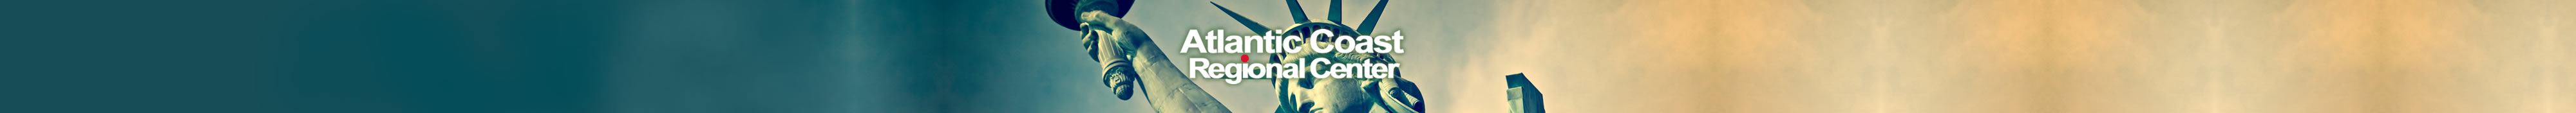 Atlantic Coast Regional Center header close-up of Statue of Liberty head and torch.